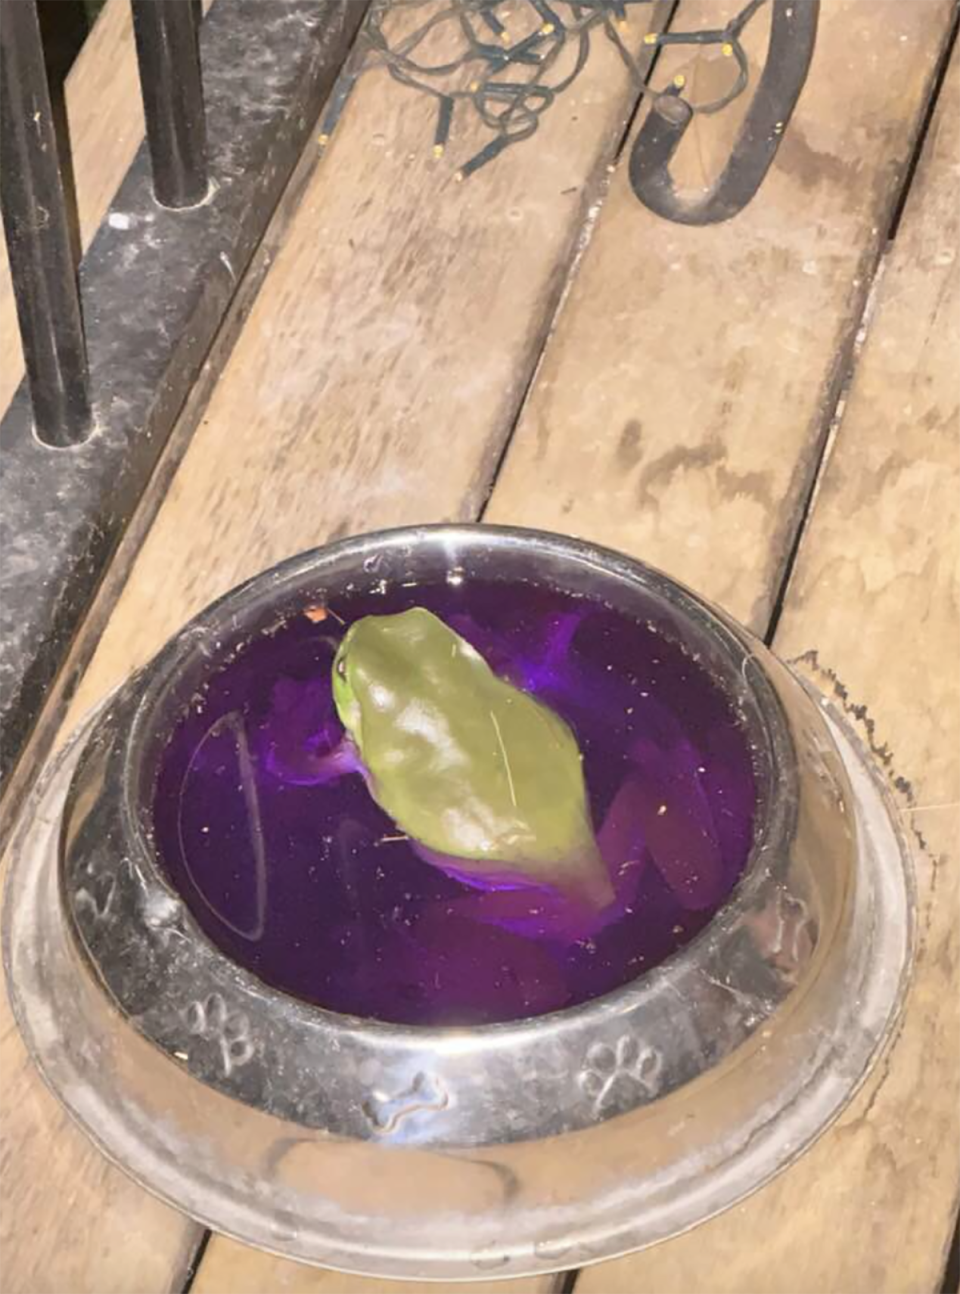 The green tree frog in the dog's bowl filled with purple water. 